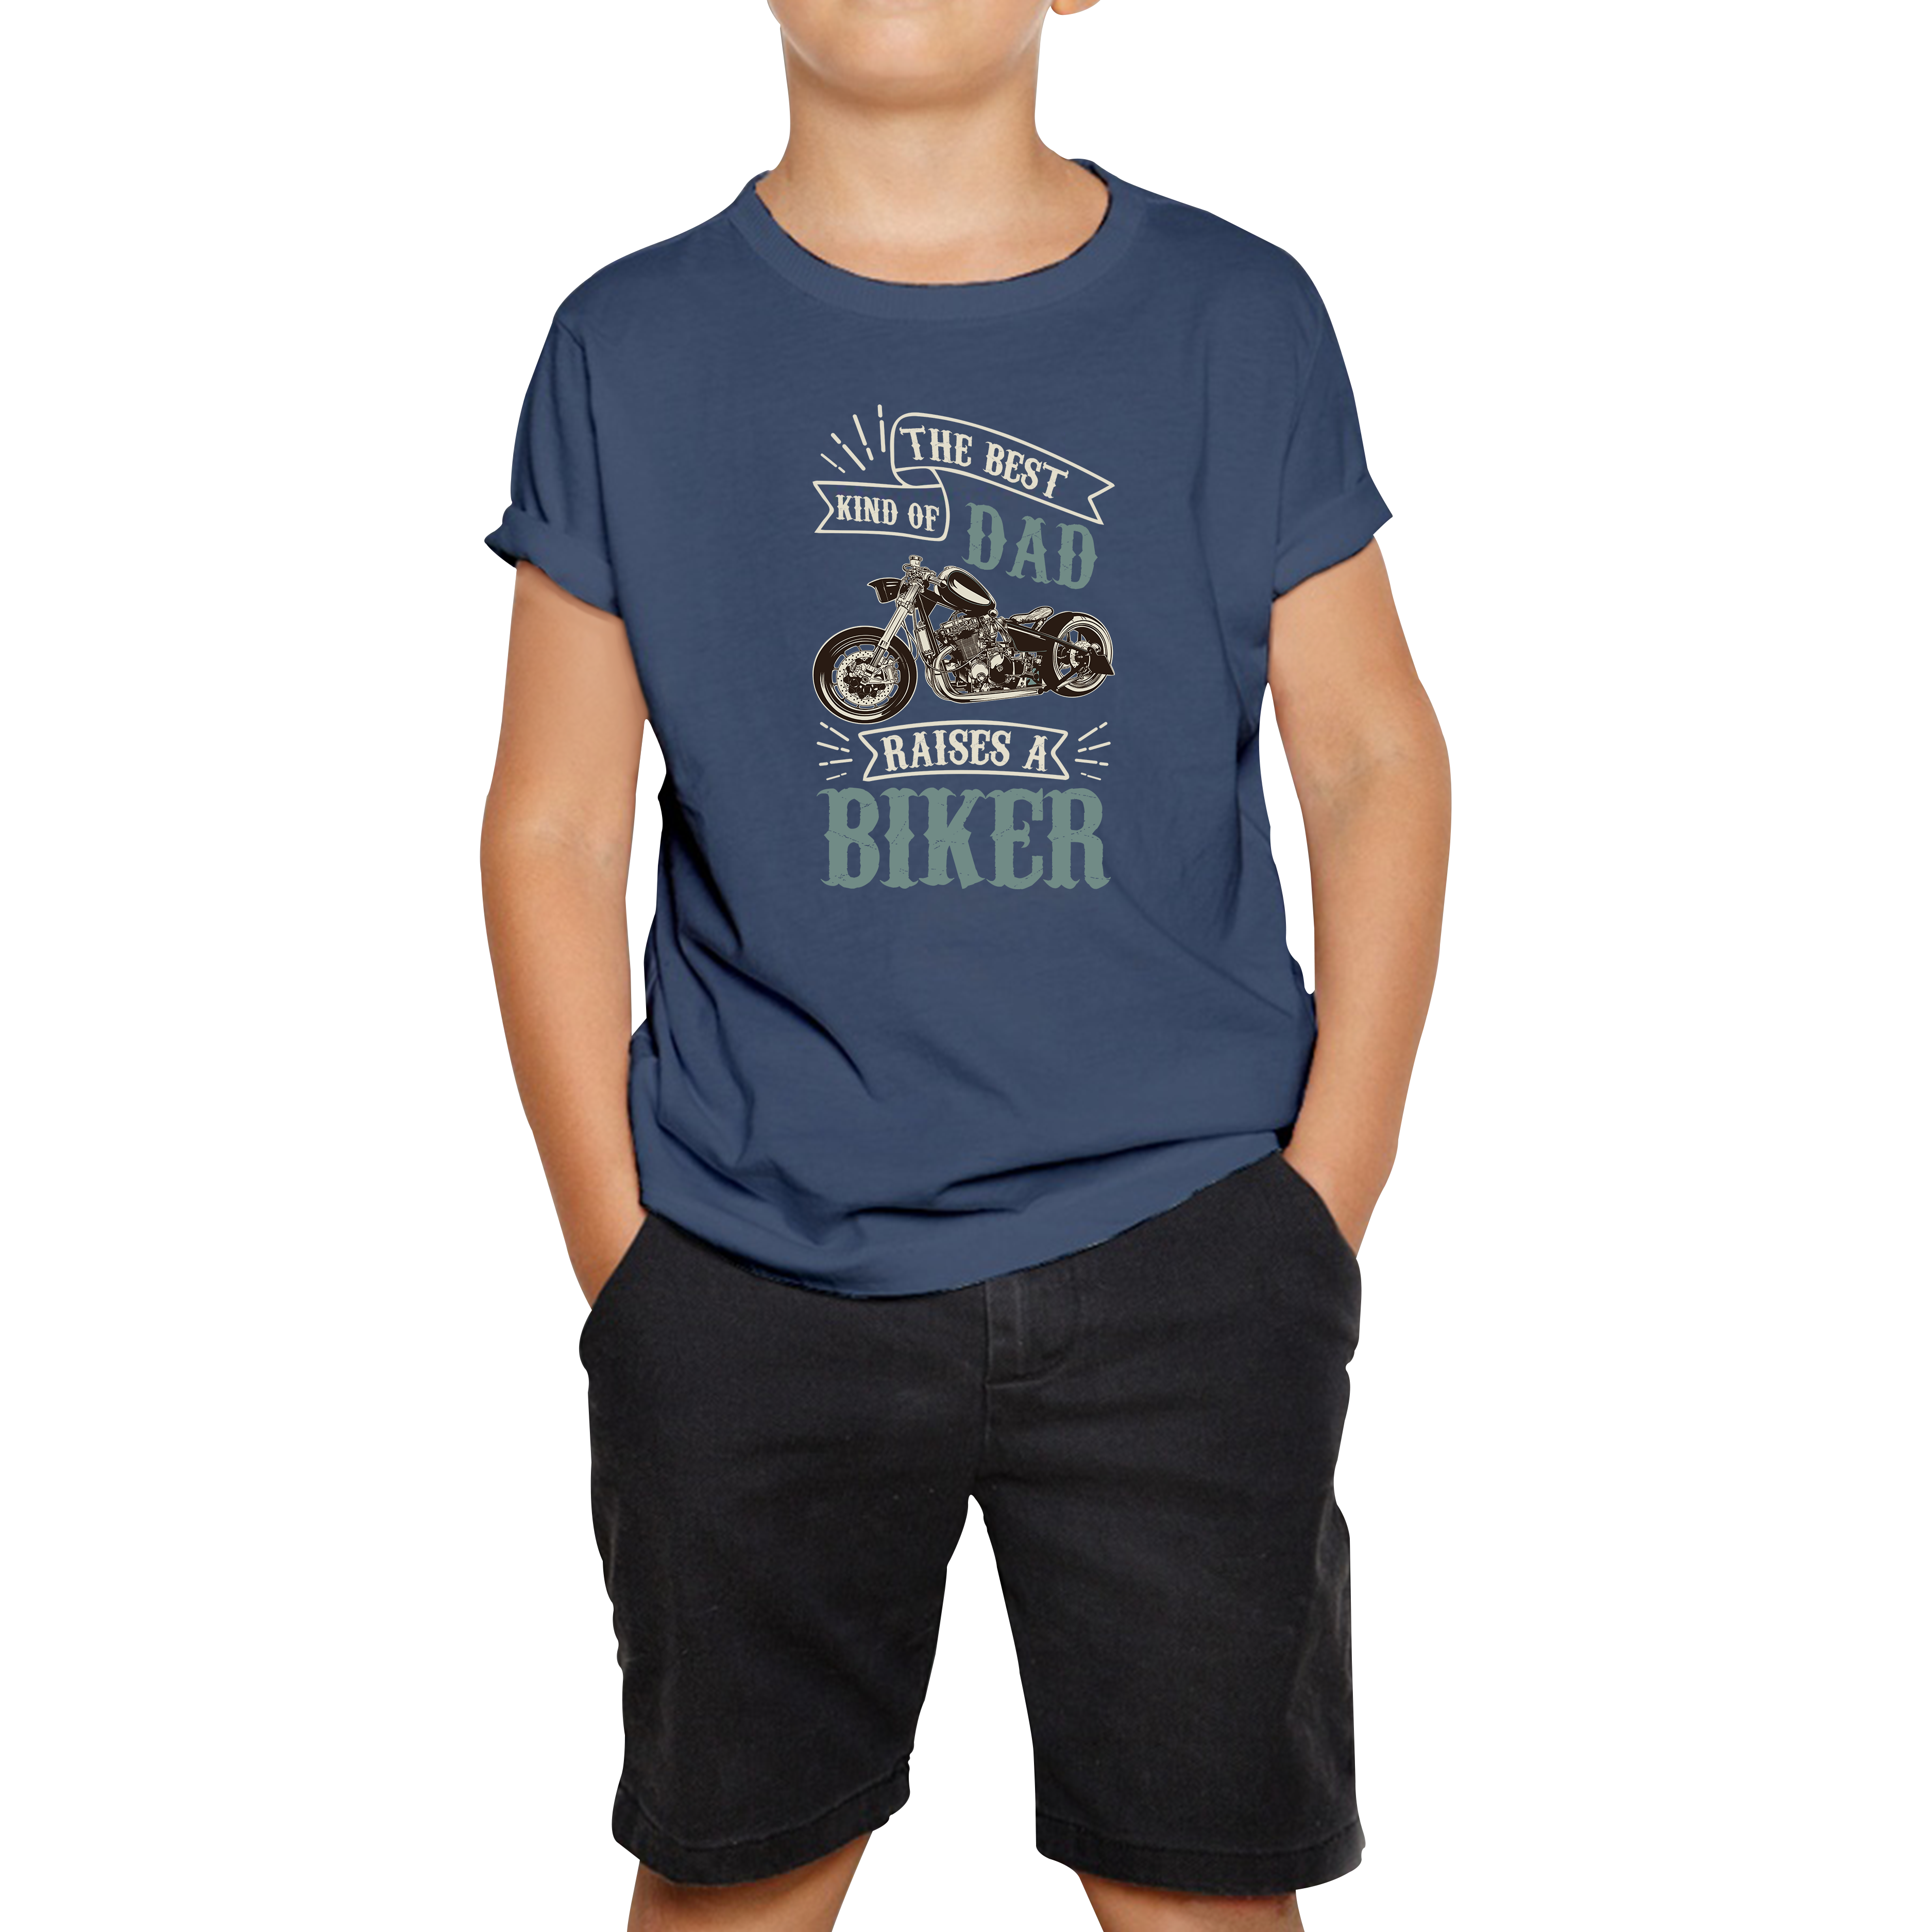 The Best Kind Of Dad Raises A Biker T-Shirt Father's Day Funny Bike Lover Racers Kids Tee